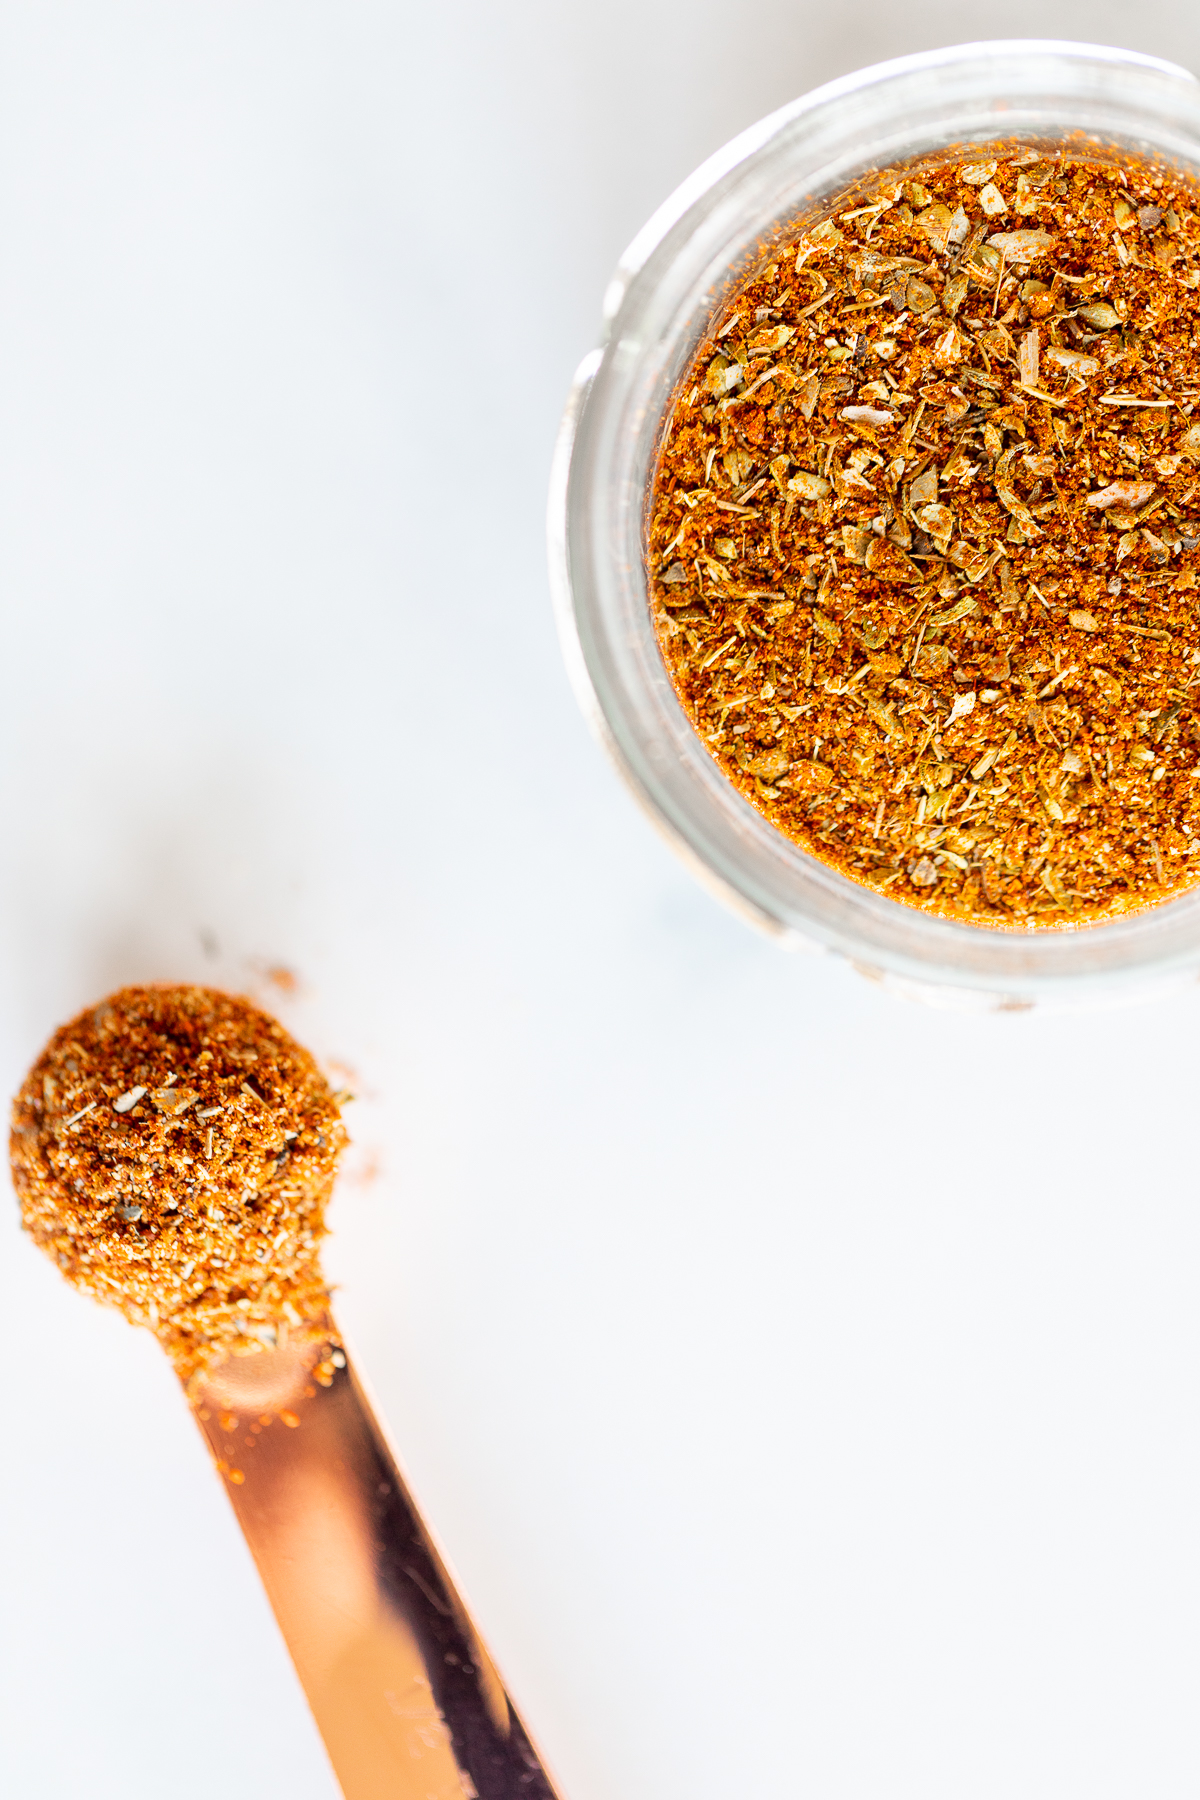 Overhead view of chipotle seasoning in jar and measuring spoon